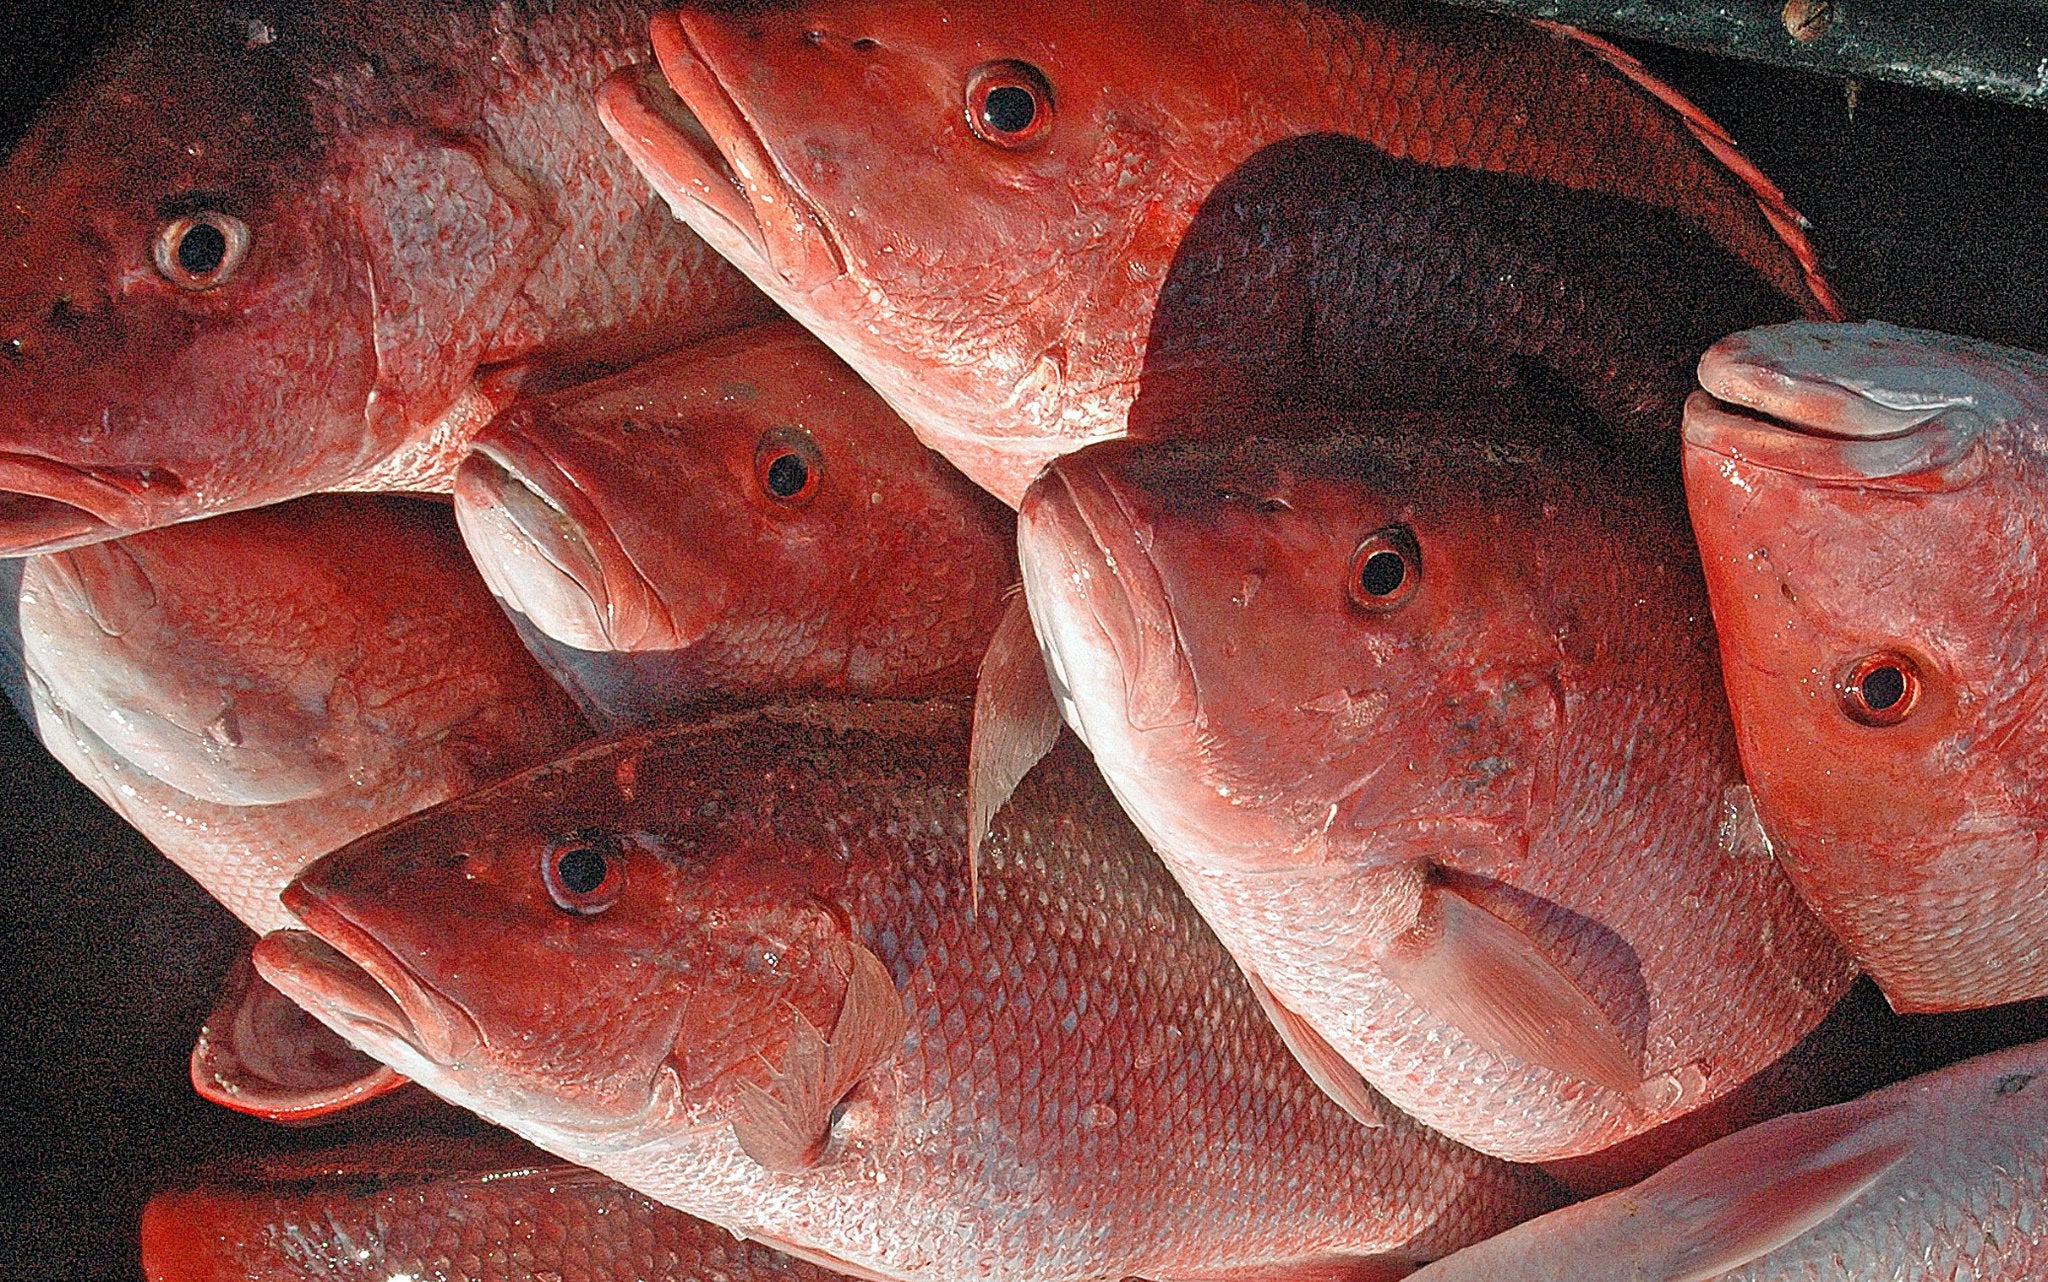 Reminder That Alabama’s Red Snapper Season Opens May 27